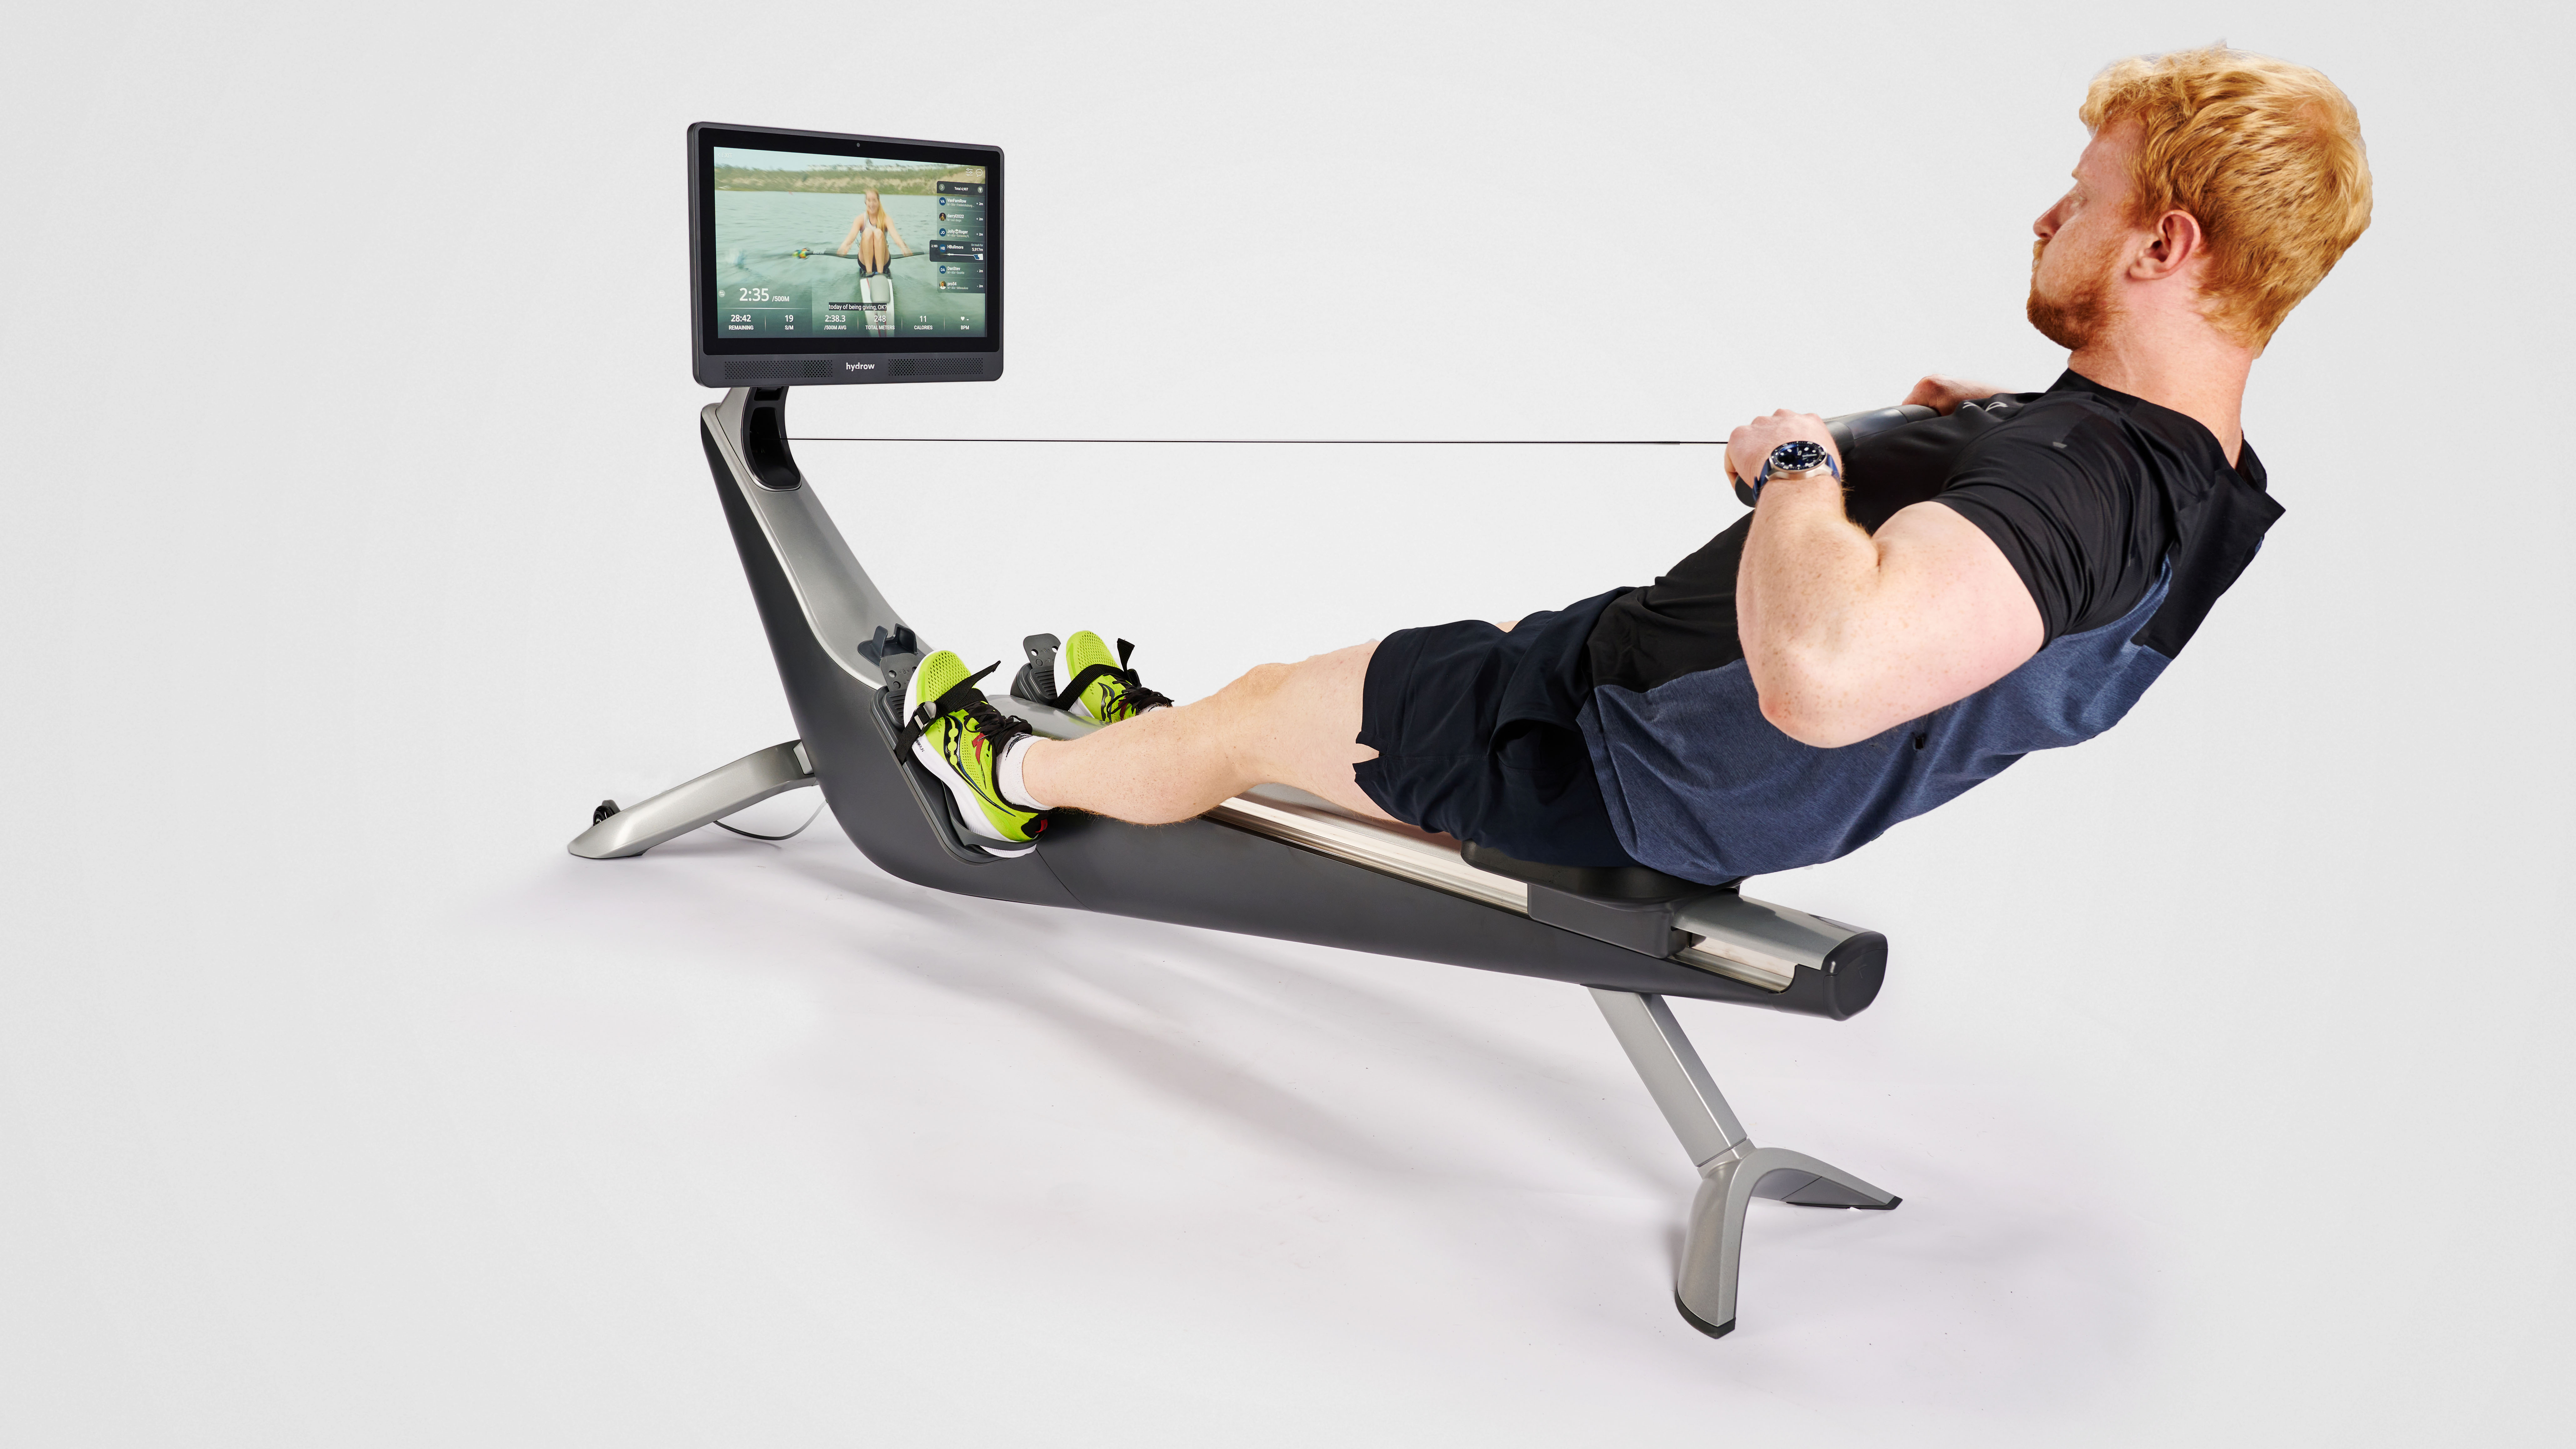 Live Science fitness writer, harry Bullmore, tests out the Hydrow rowing machine